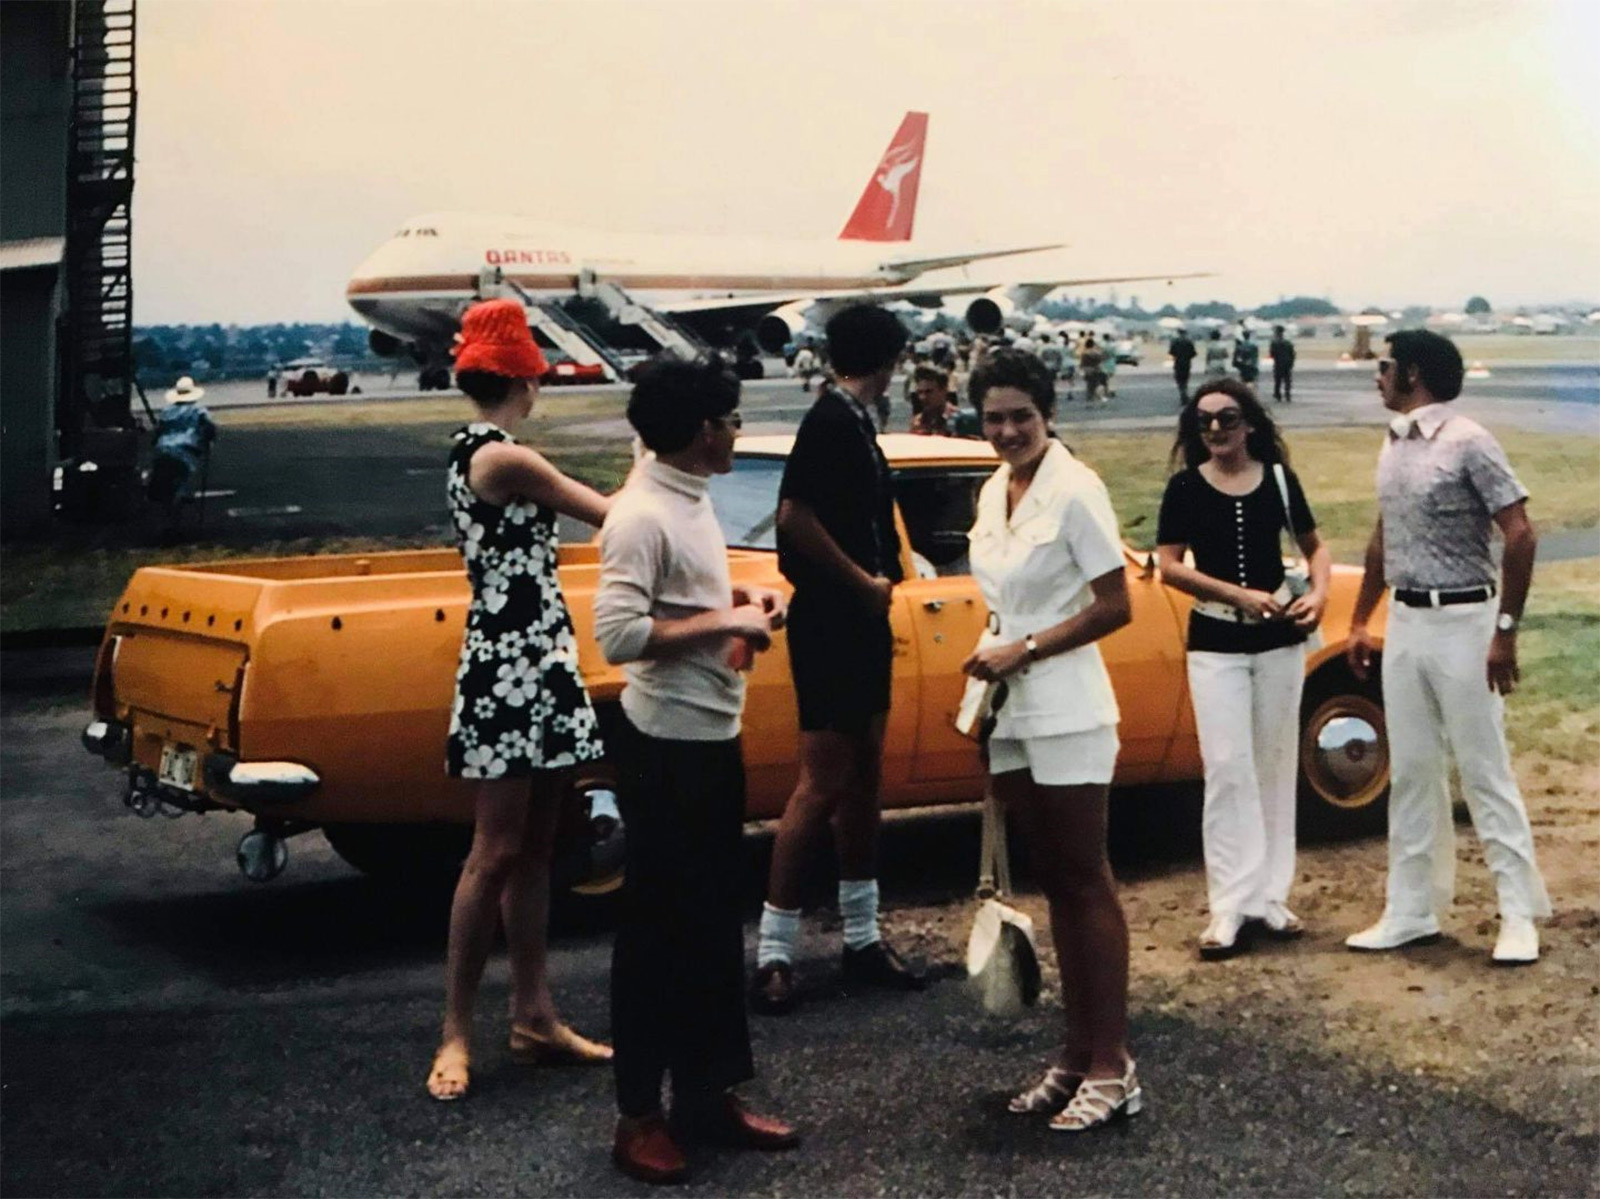 The first 747 landing at BNE in 1971 caused quite the fanfare 